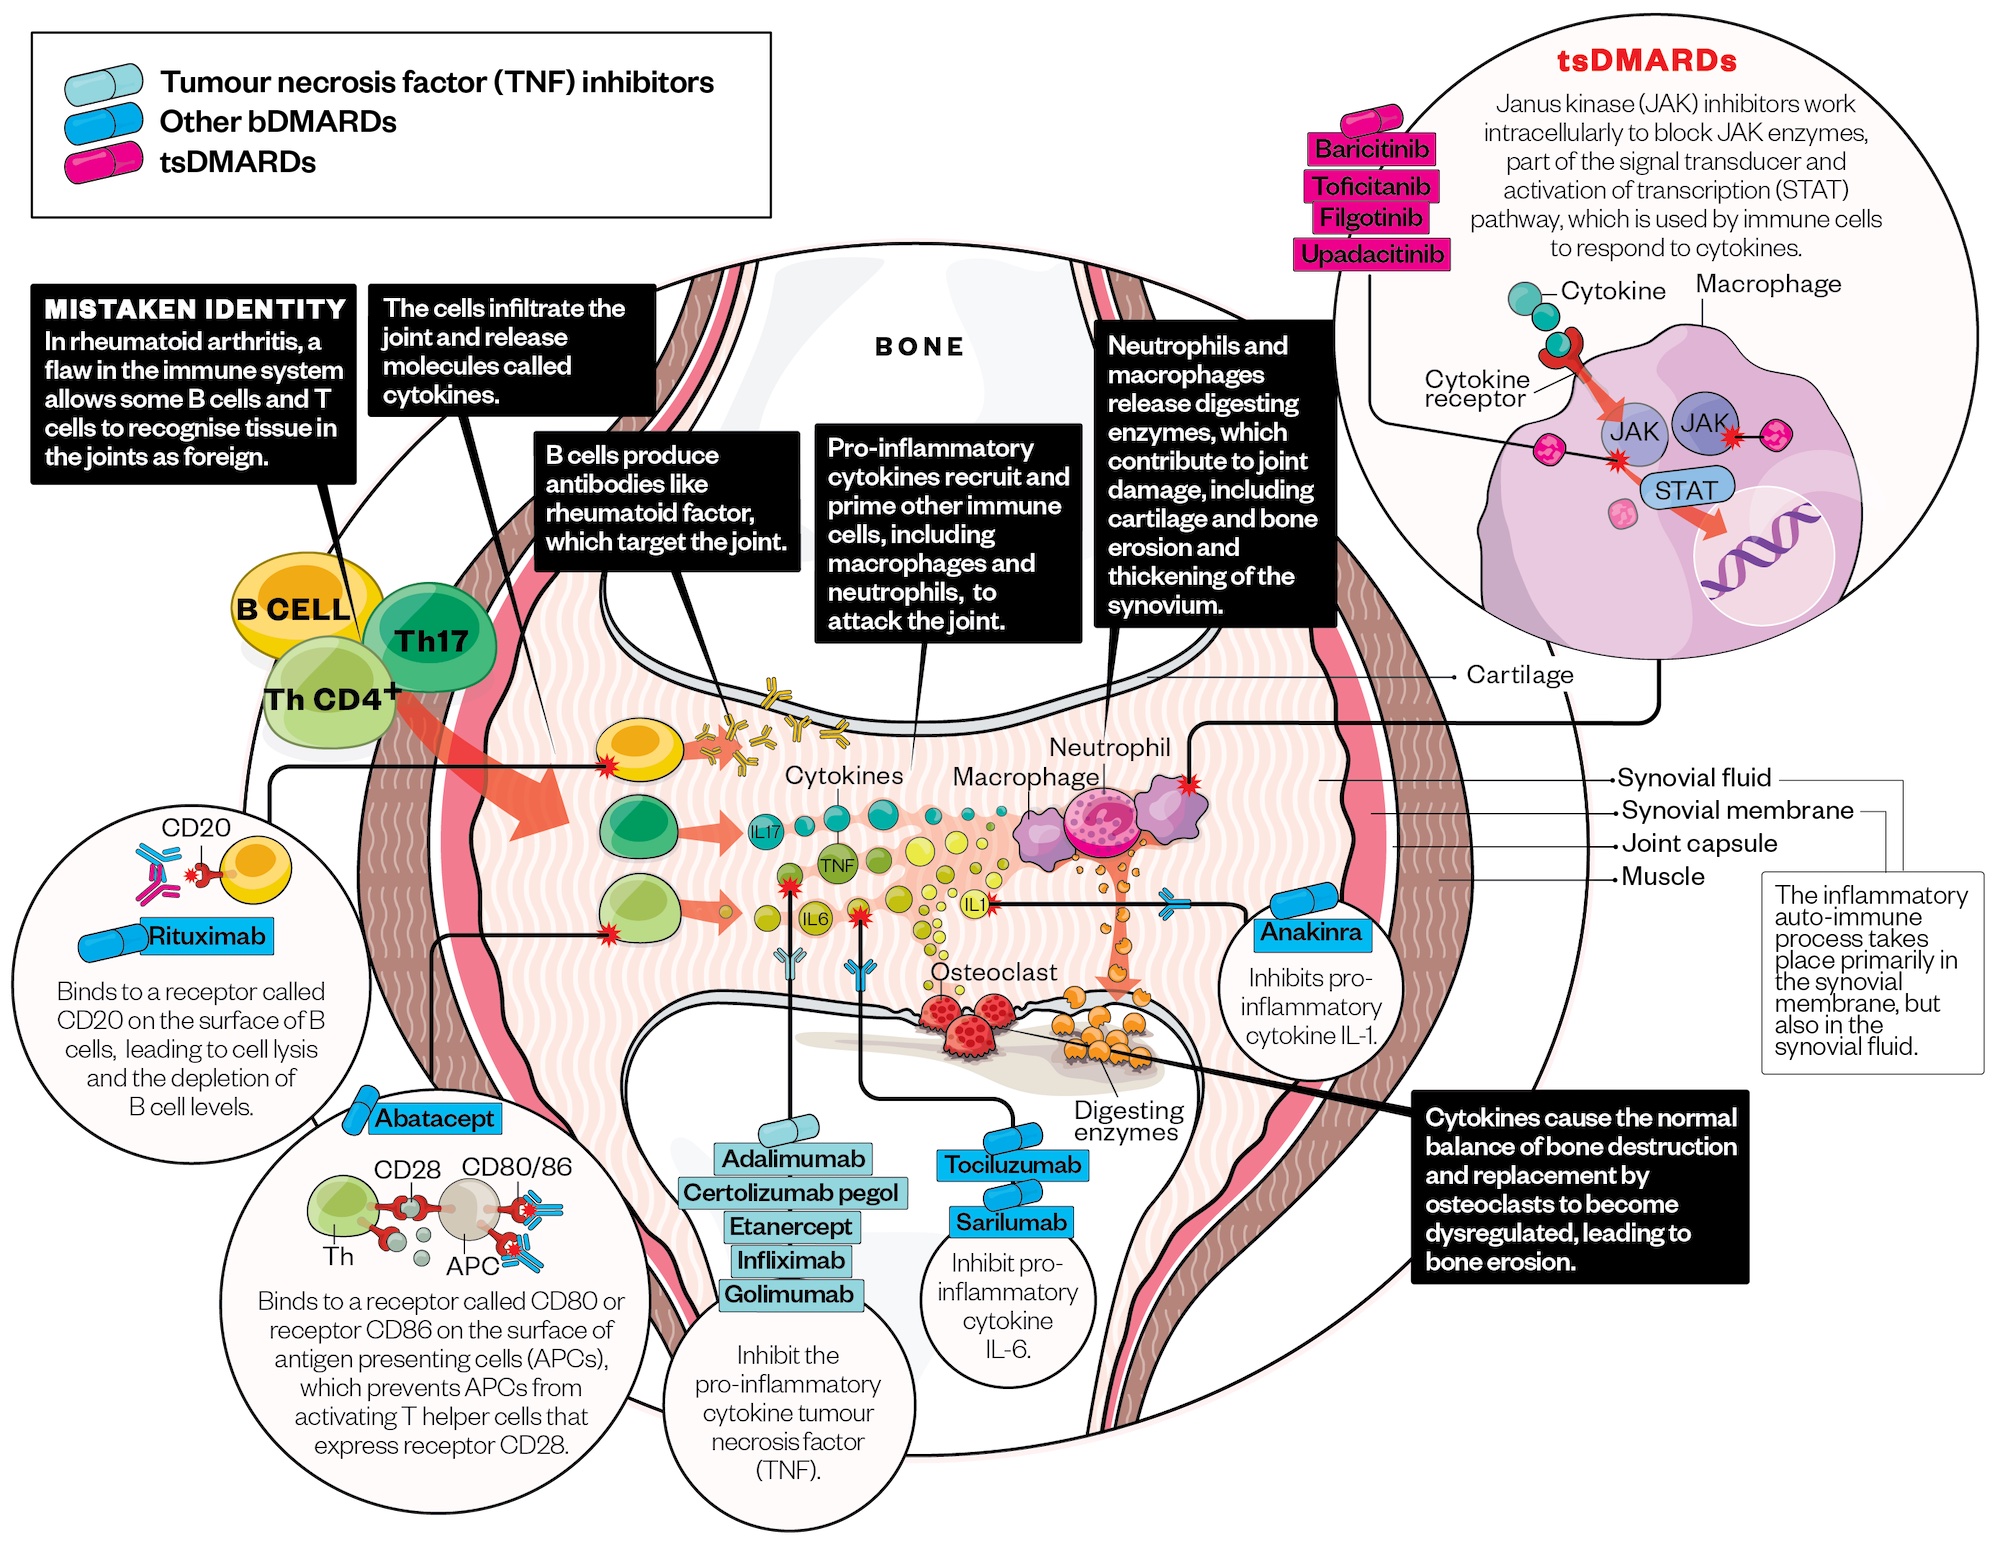 Diagram of different pharmaceutical treatments for rheumatoid arthritis and their actions